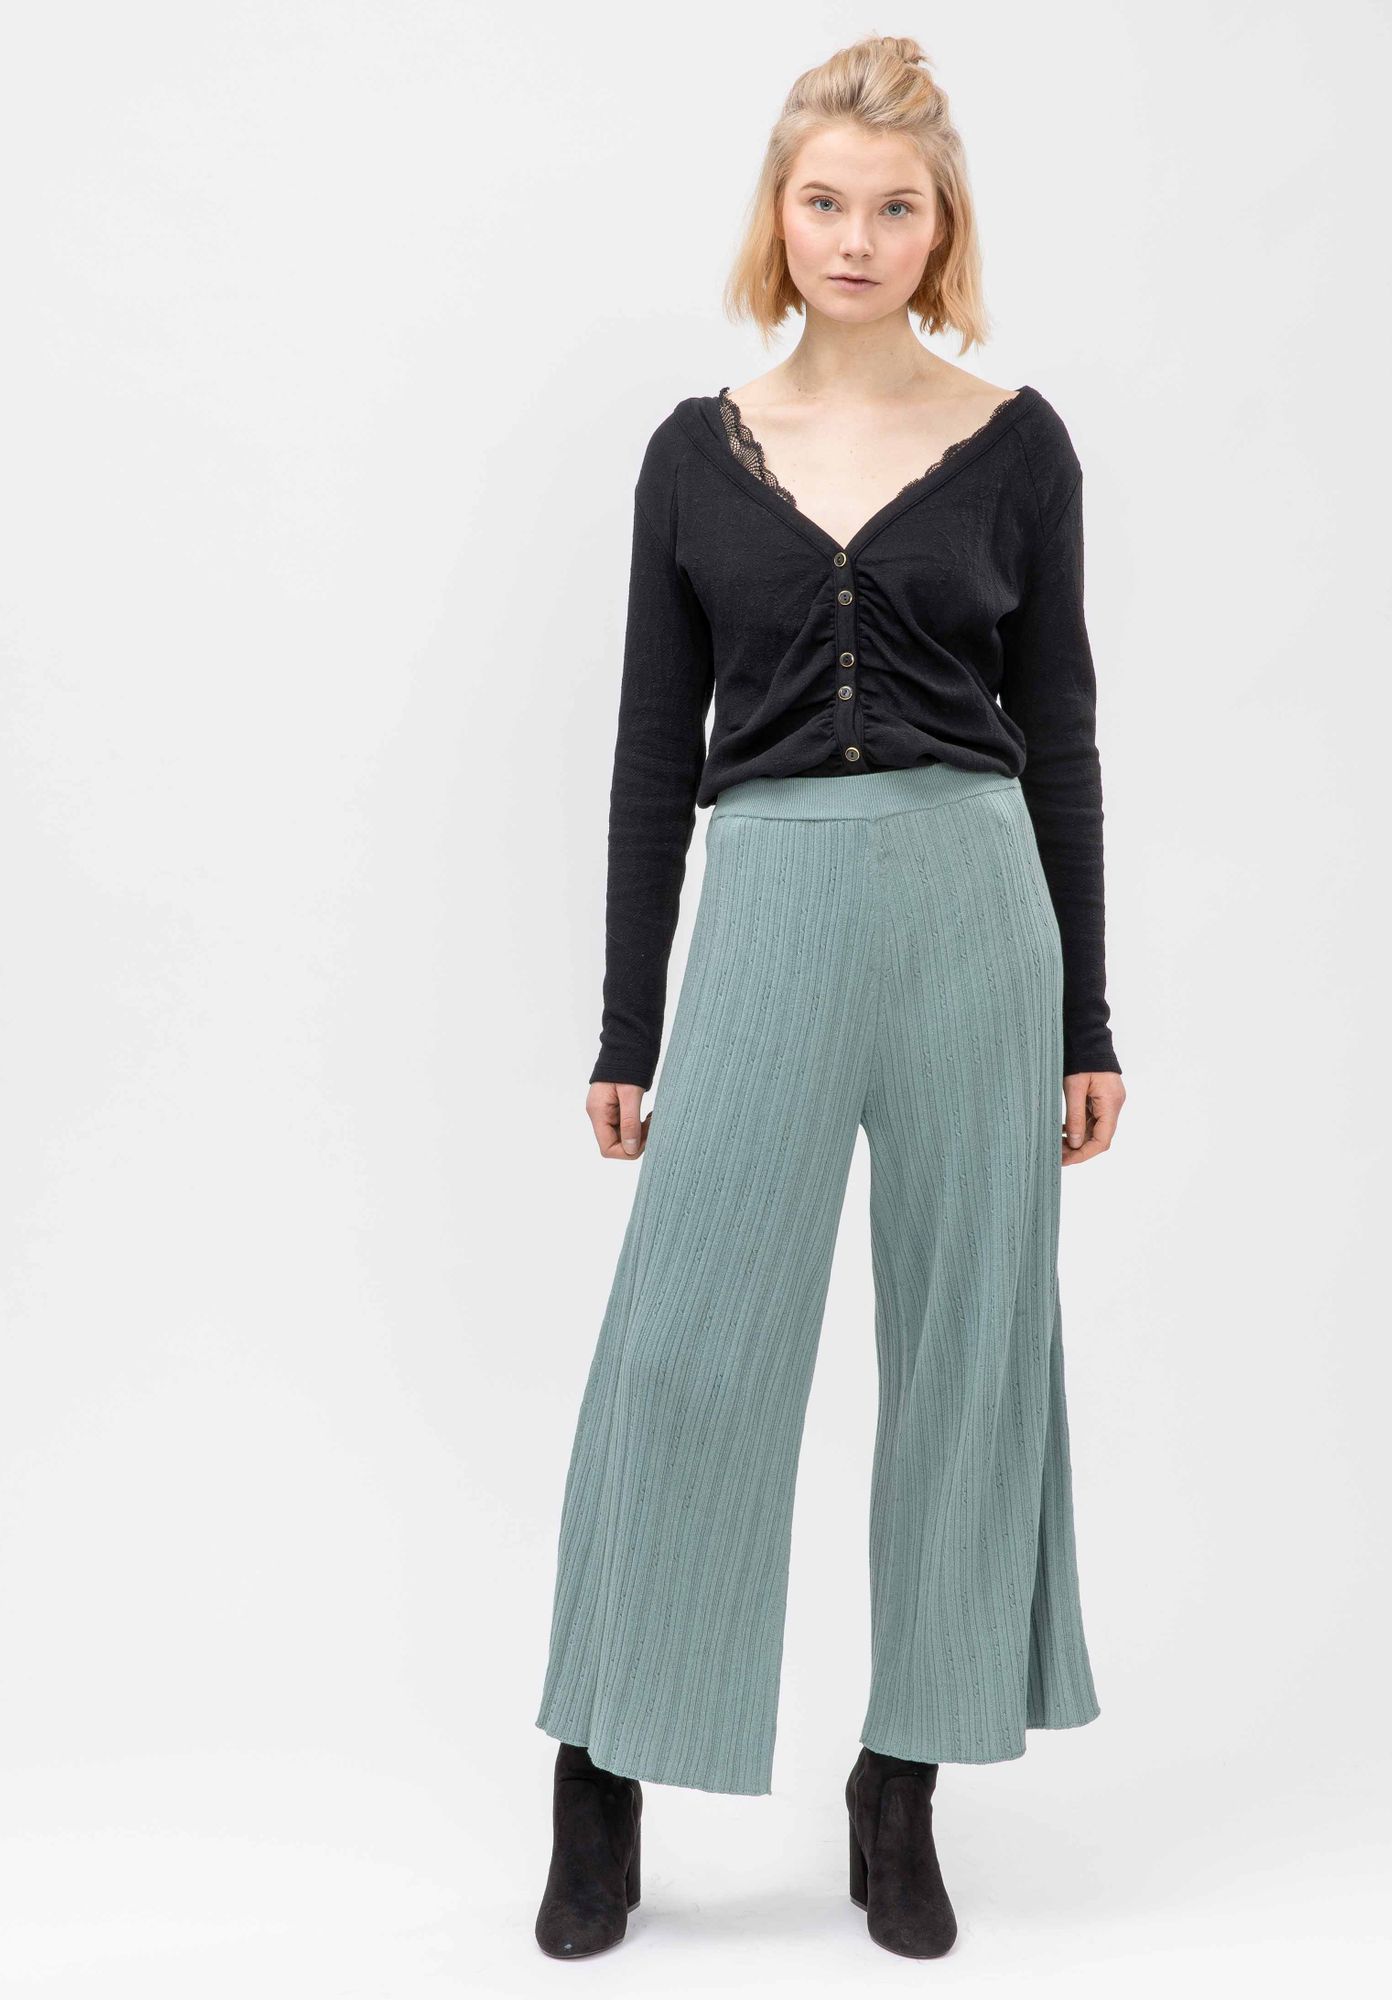 LATHI trousers in culotte shape in antique green by LOVJOI made from organic cotton